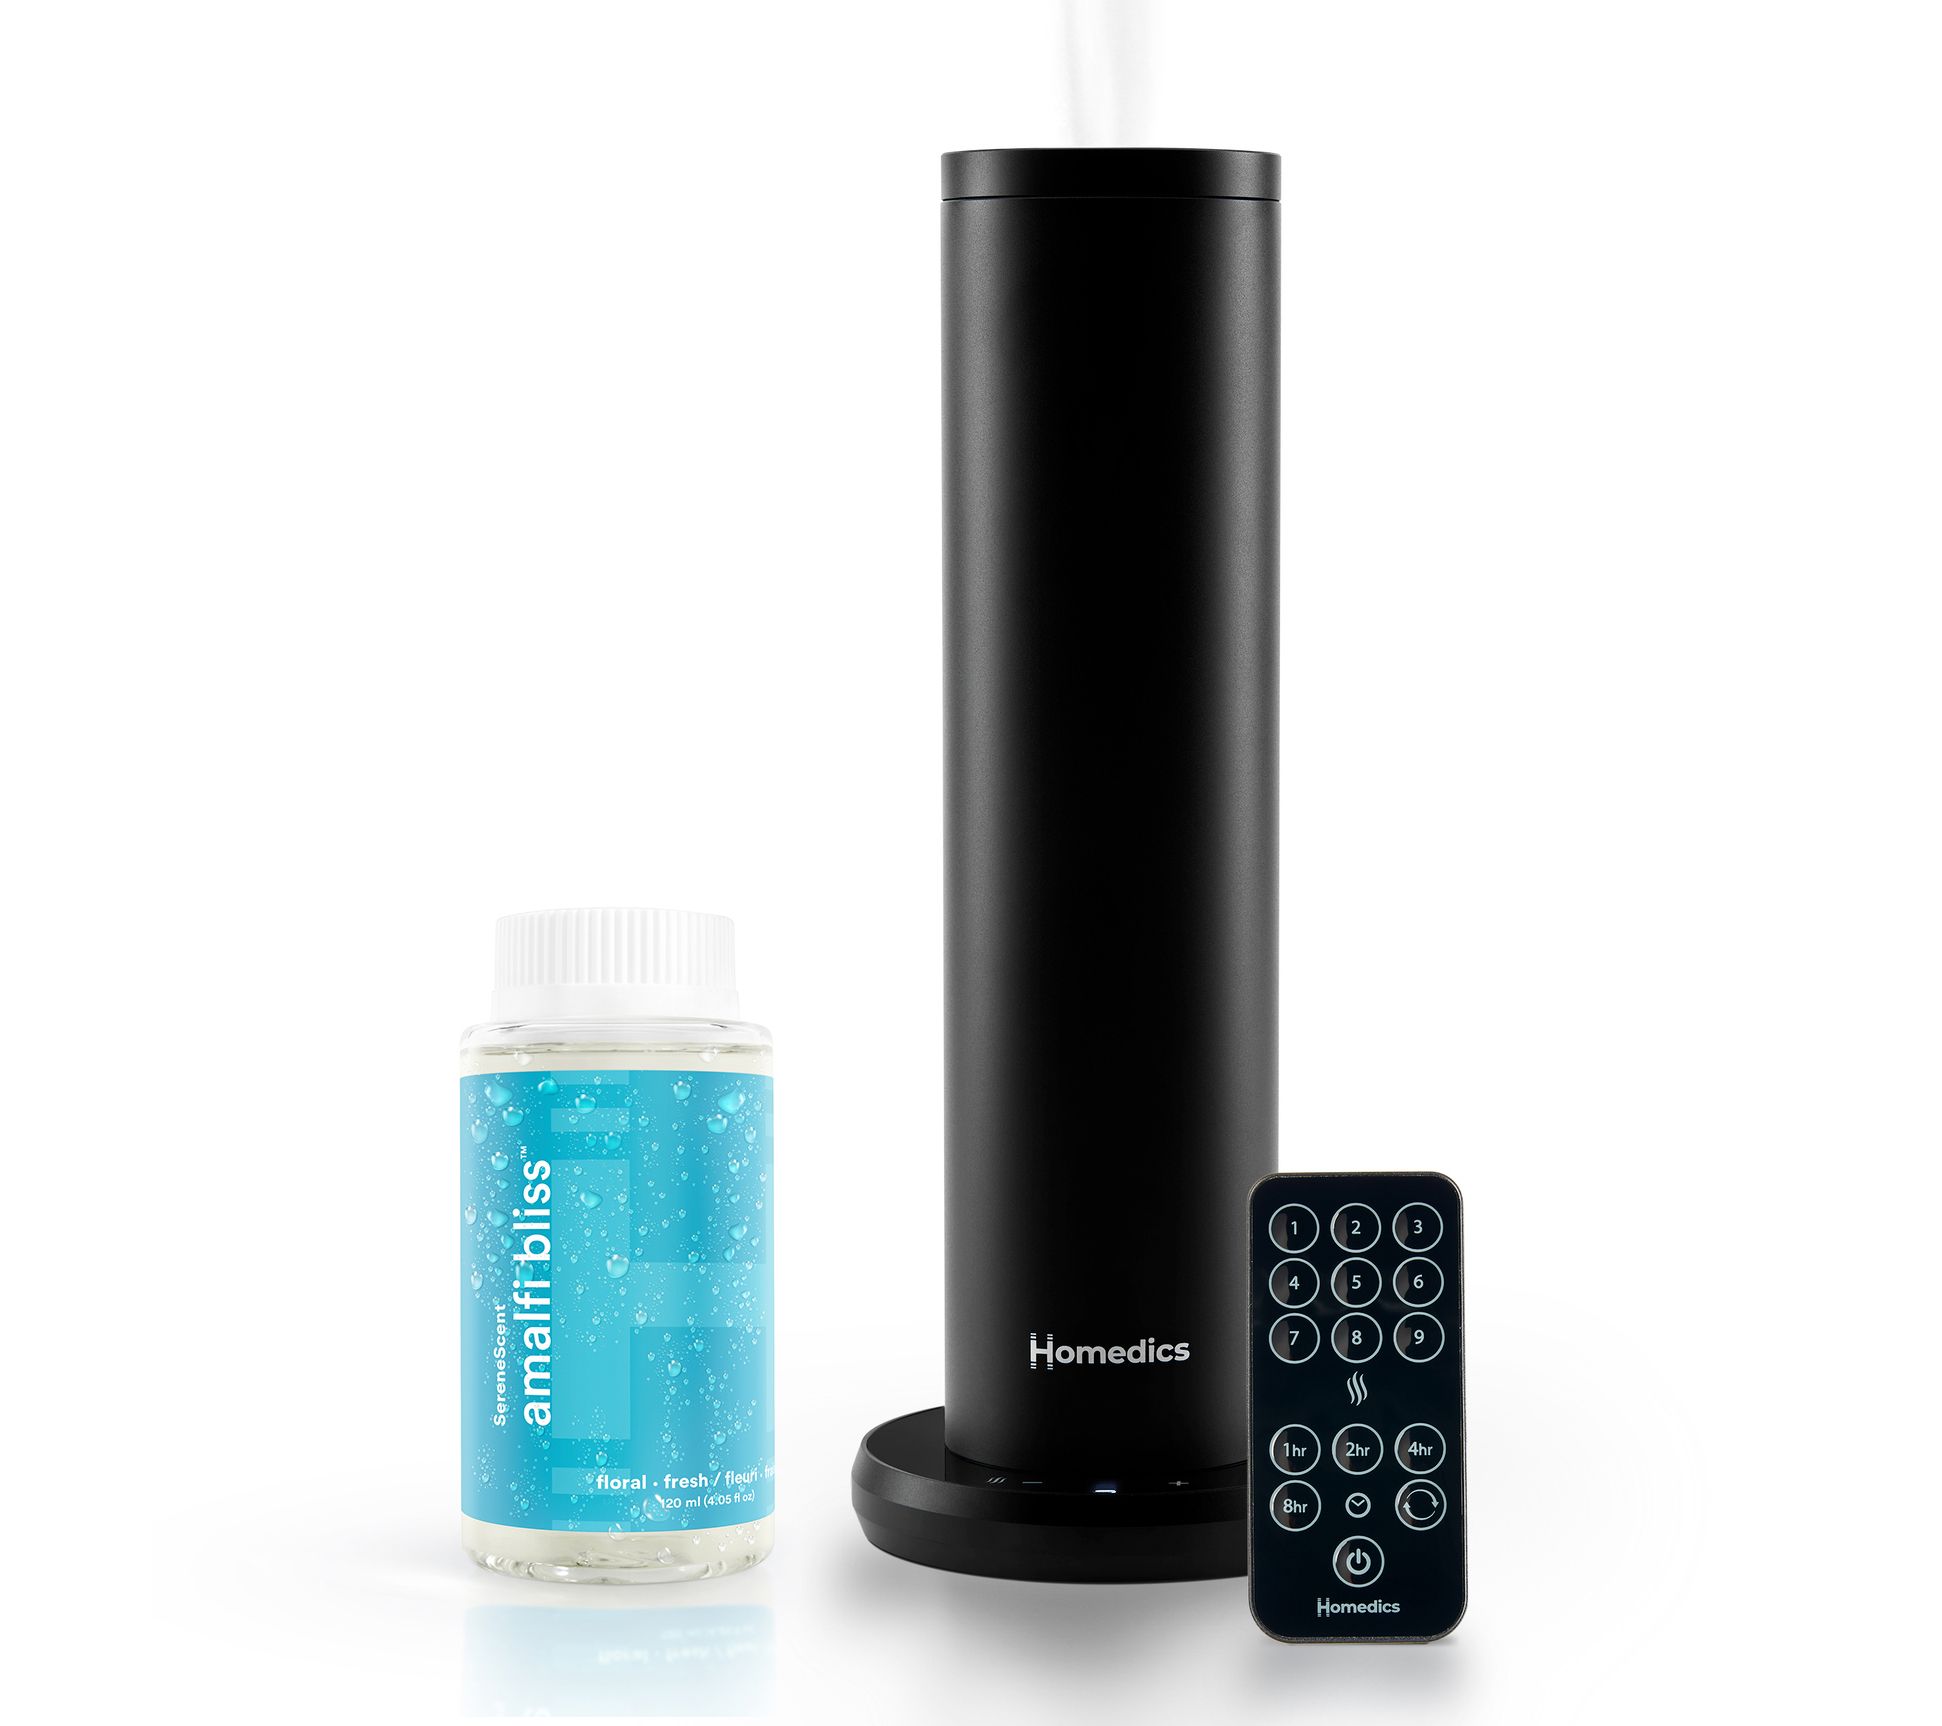 Get Fit With the Fitness Essential Oil Diffuser Set! - Simply Earth Blog